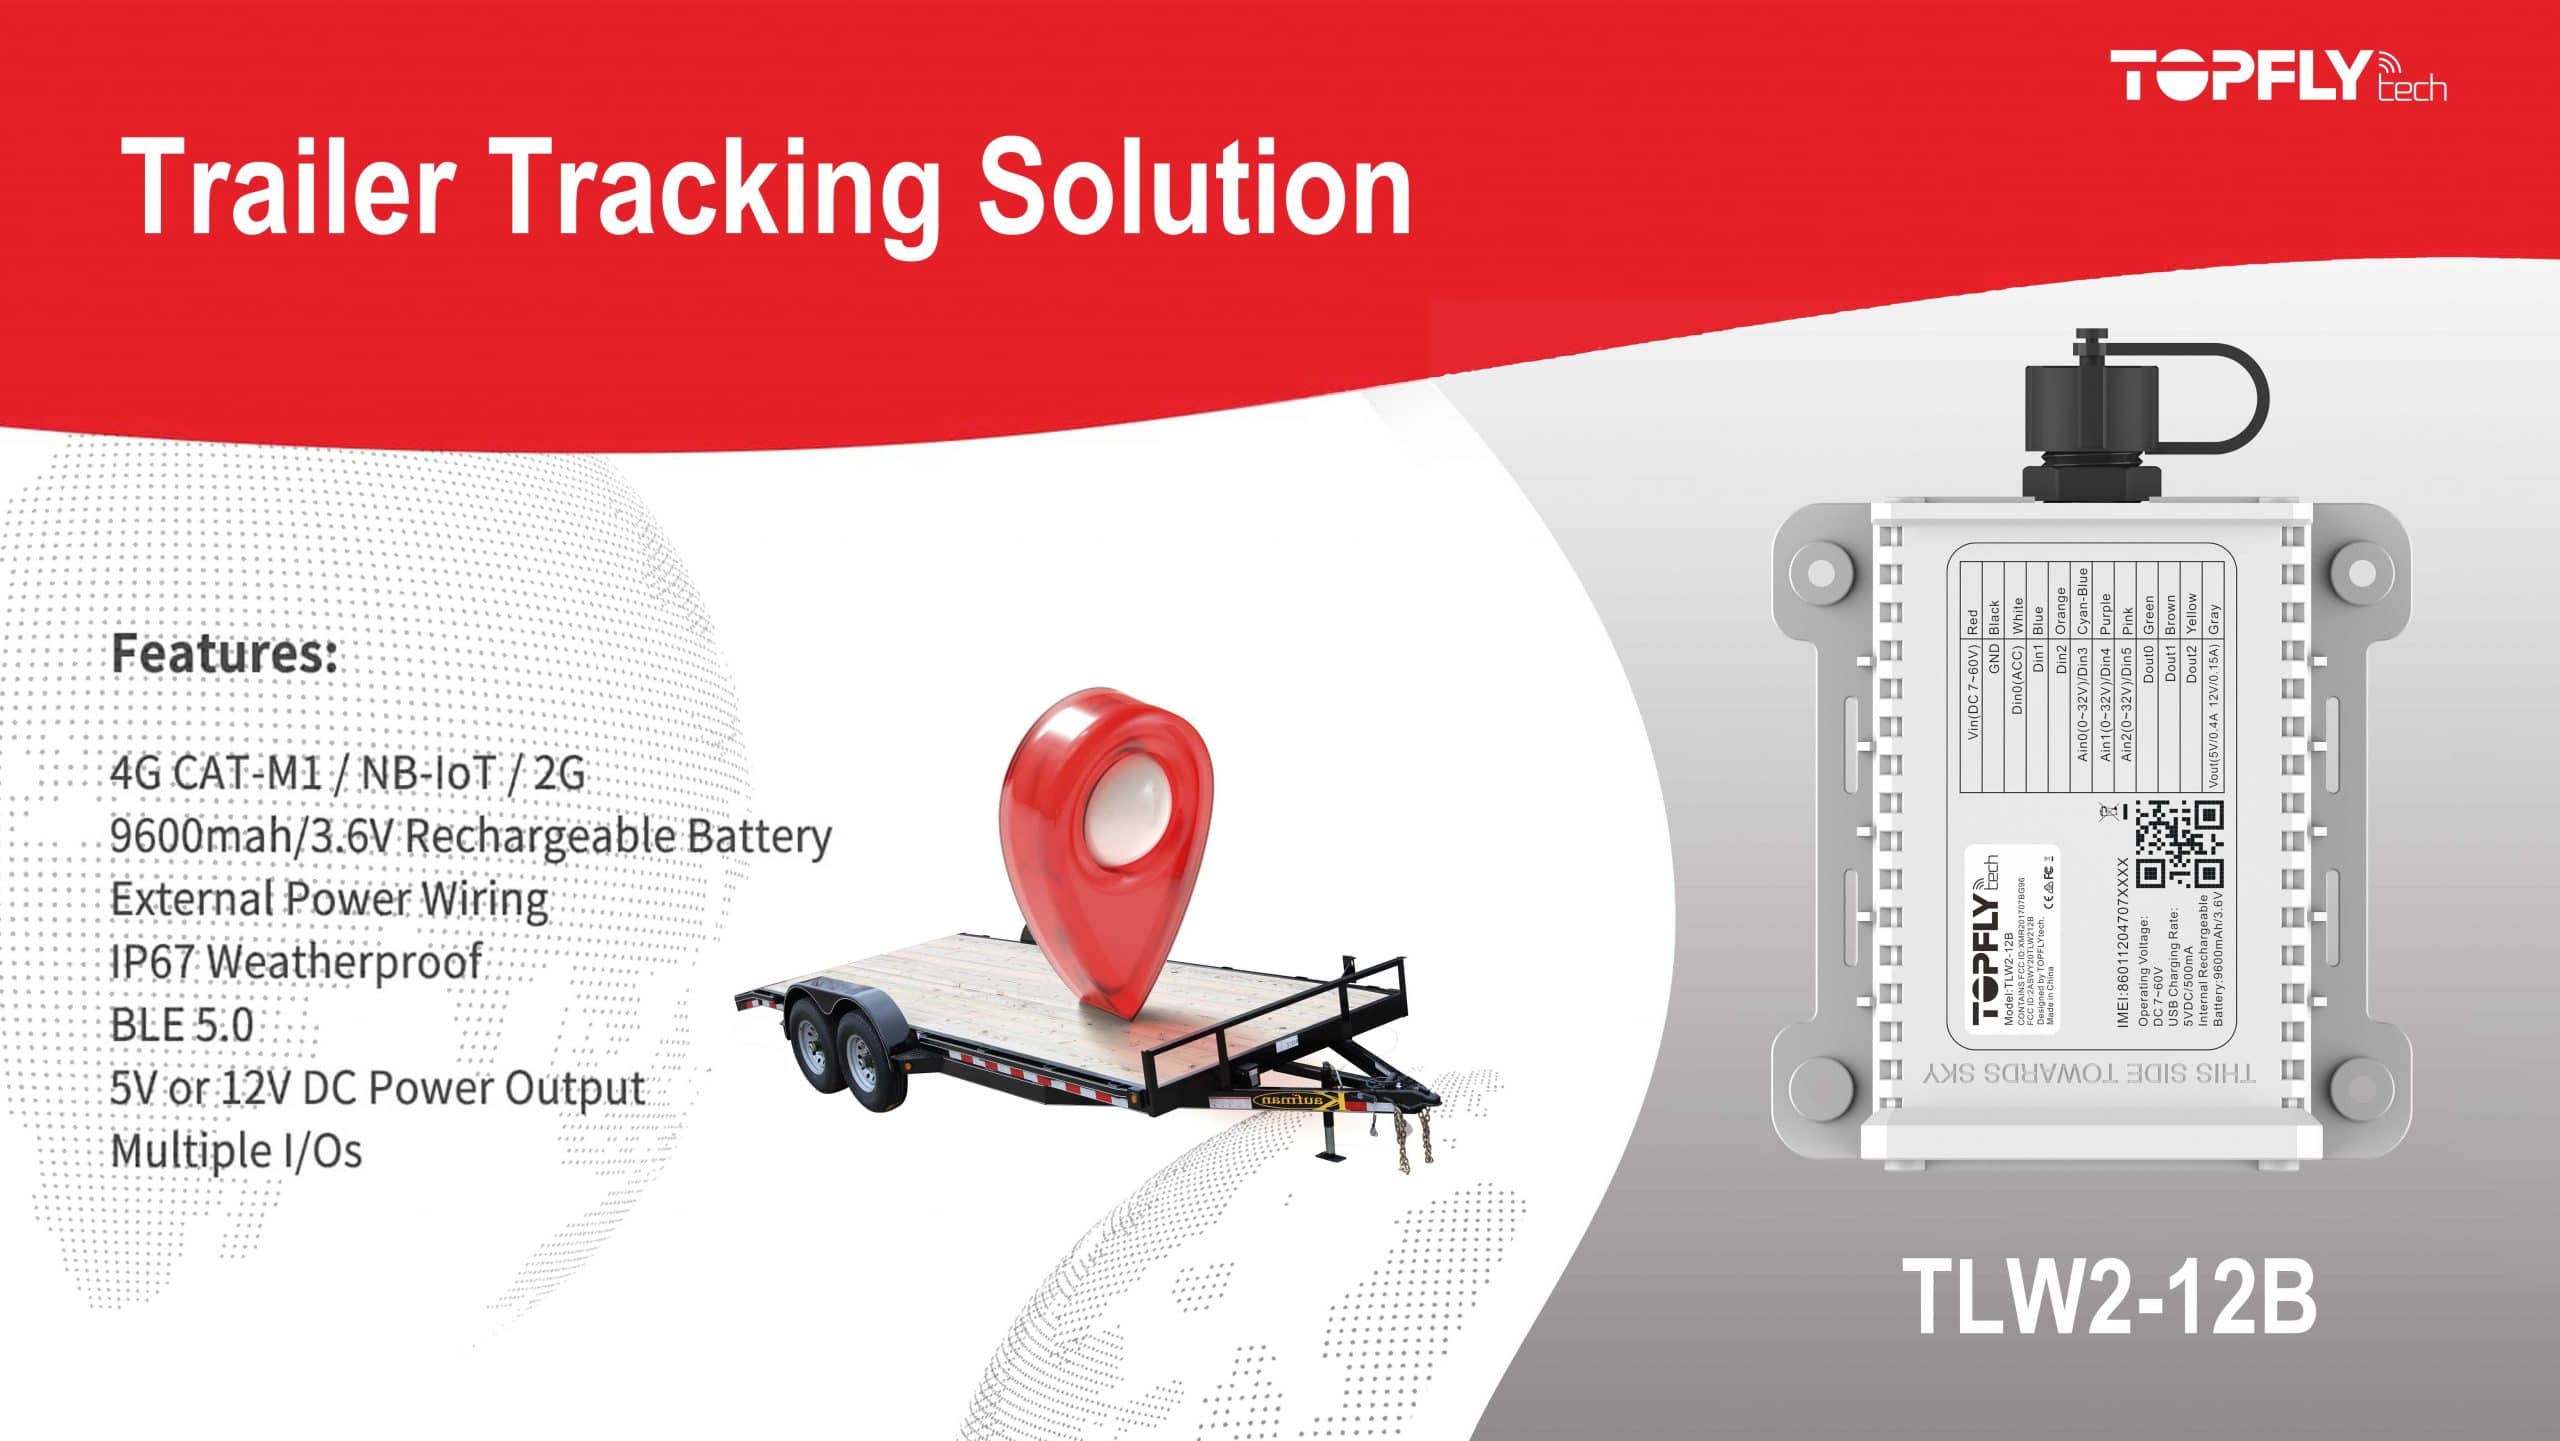 Trailer Tracking Solution